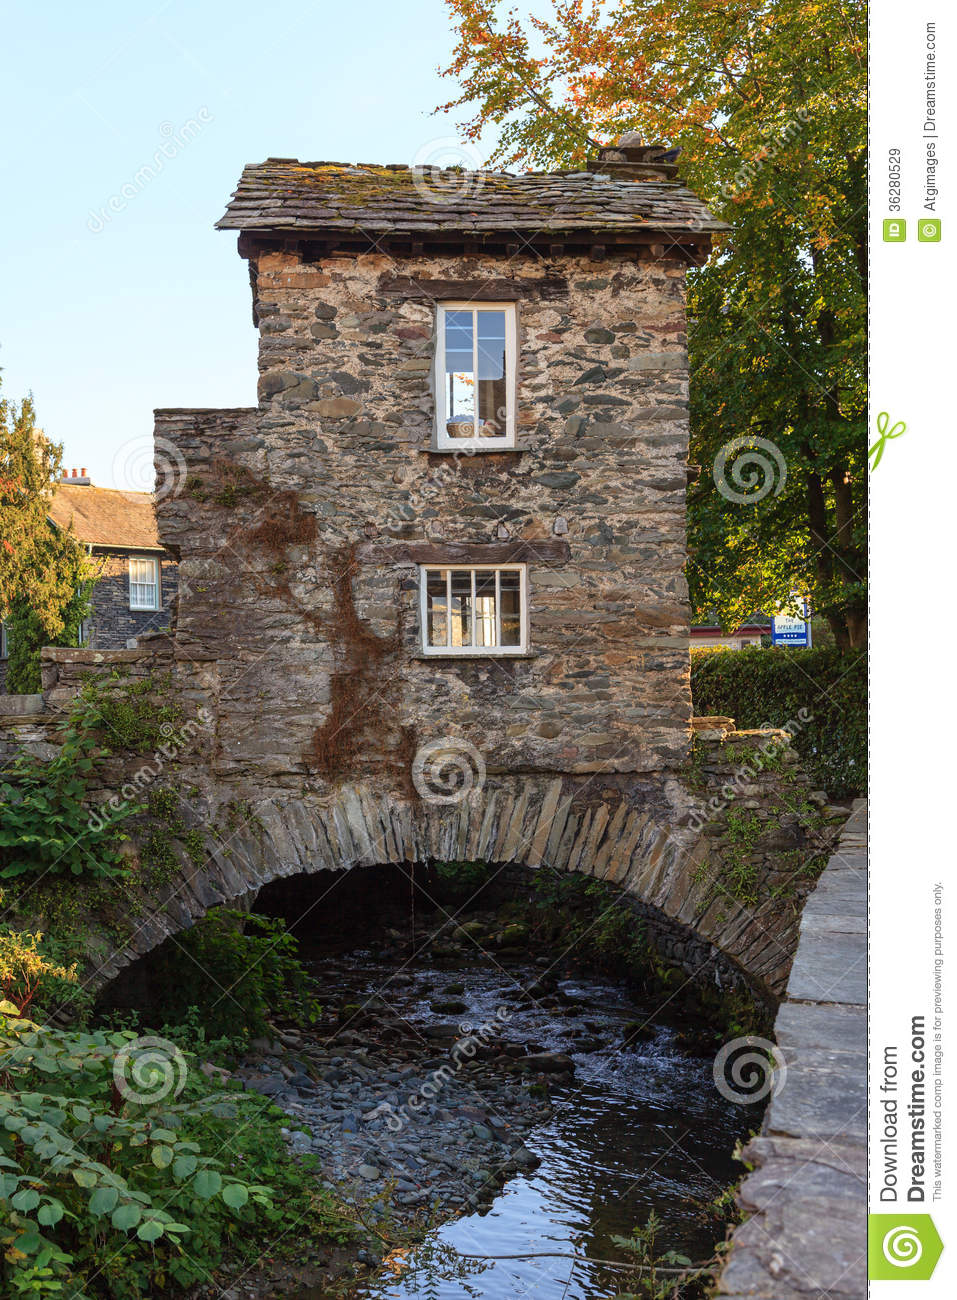 ambleside-bridge-house-th-century-old-stone-cottage-perched-over-stock-beck-cumbria-english-lake-district-pictured-36280529